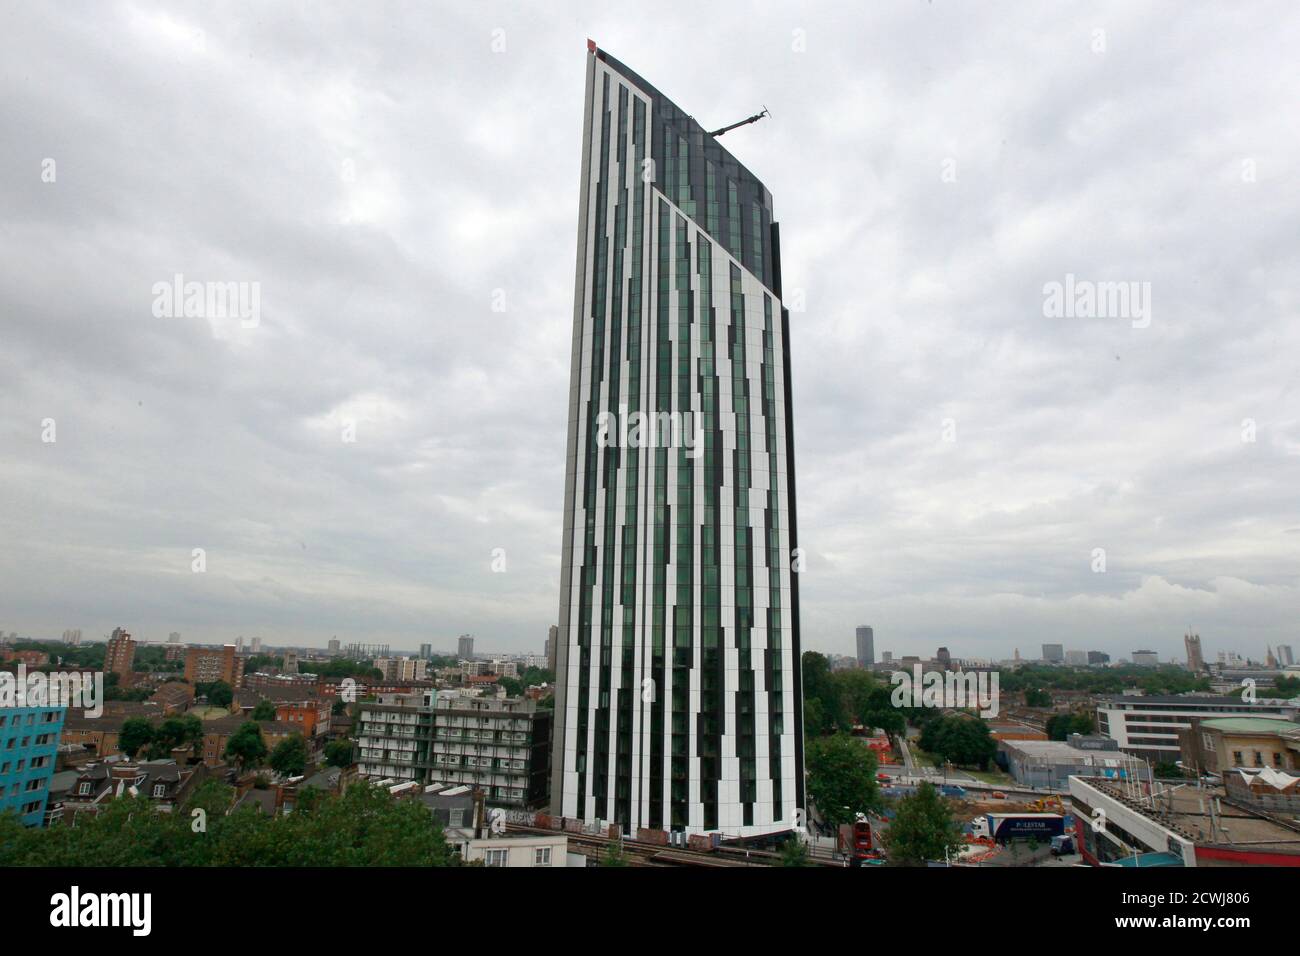 BFLS's Strata tower, which won the Carbuncle Cup as Britain's ugliest new building, is seen in the Elephant & Castle area of London August 13, 2010. Thirty-one buildings were nominated for the annual award by readers of Building Design trade newspaper.  REUTERS/Luke MacGregor    (BRITAIN - Tags: CITYSCAPE SOCIETY) Stock Photo